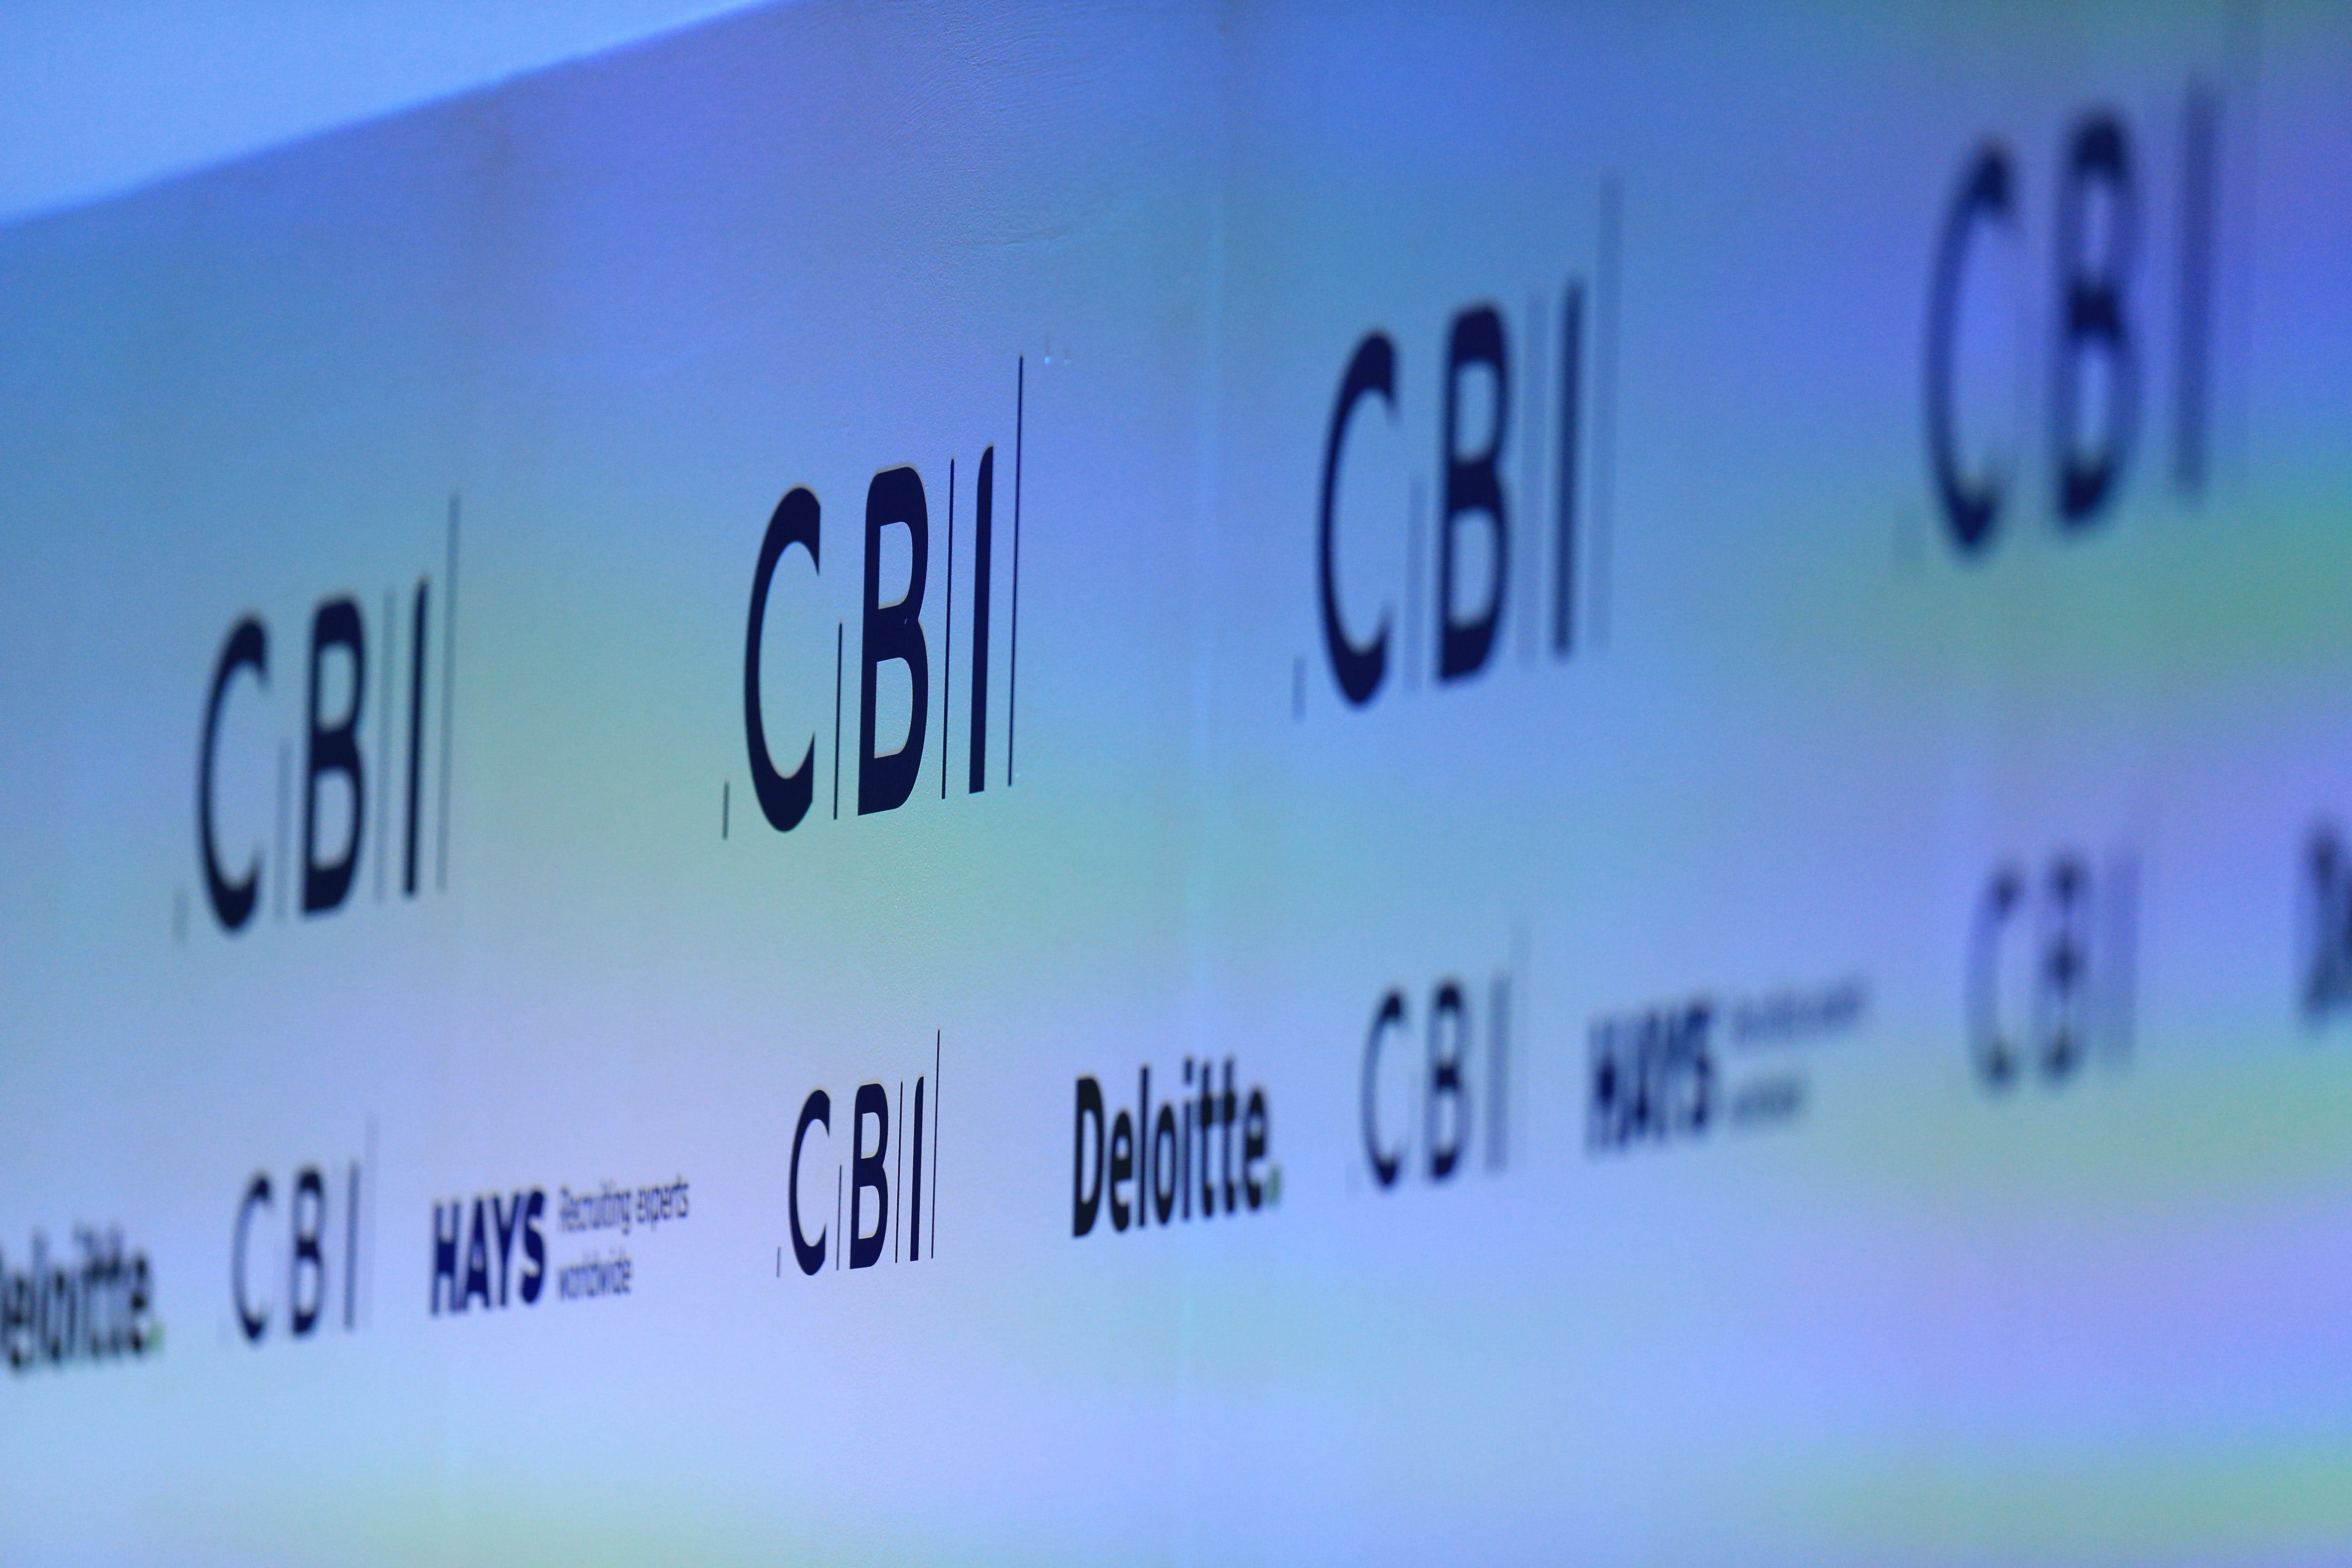 Ministers have called off meetings with the CBI over allegations of sexual misconduct at the business group (Jonathan Brady/PA)